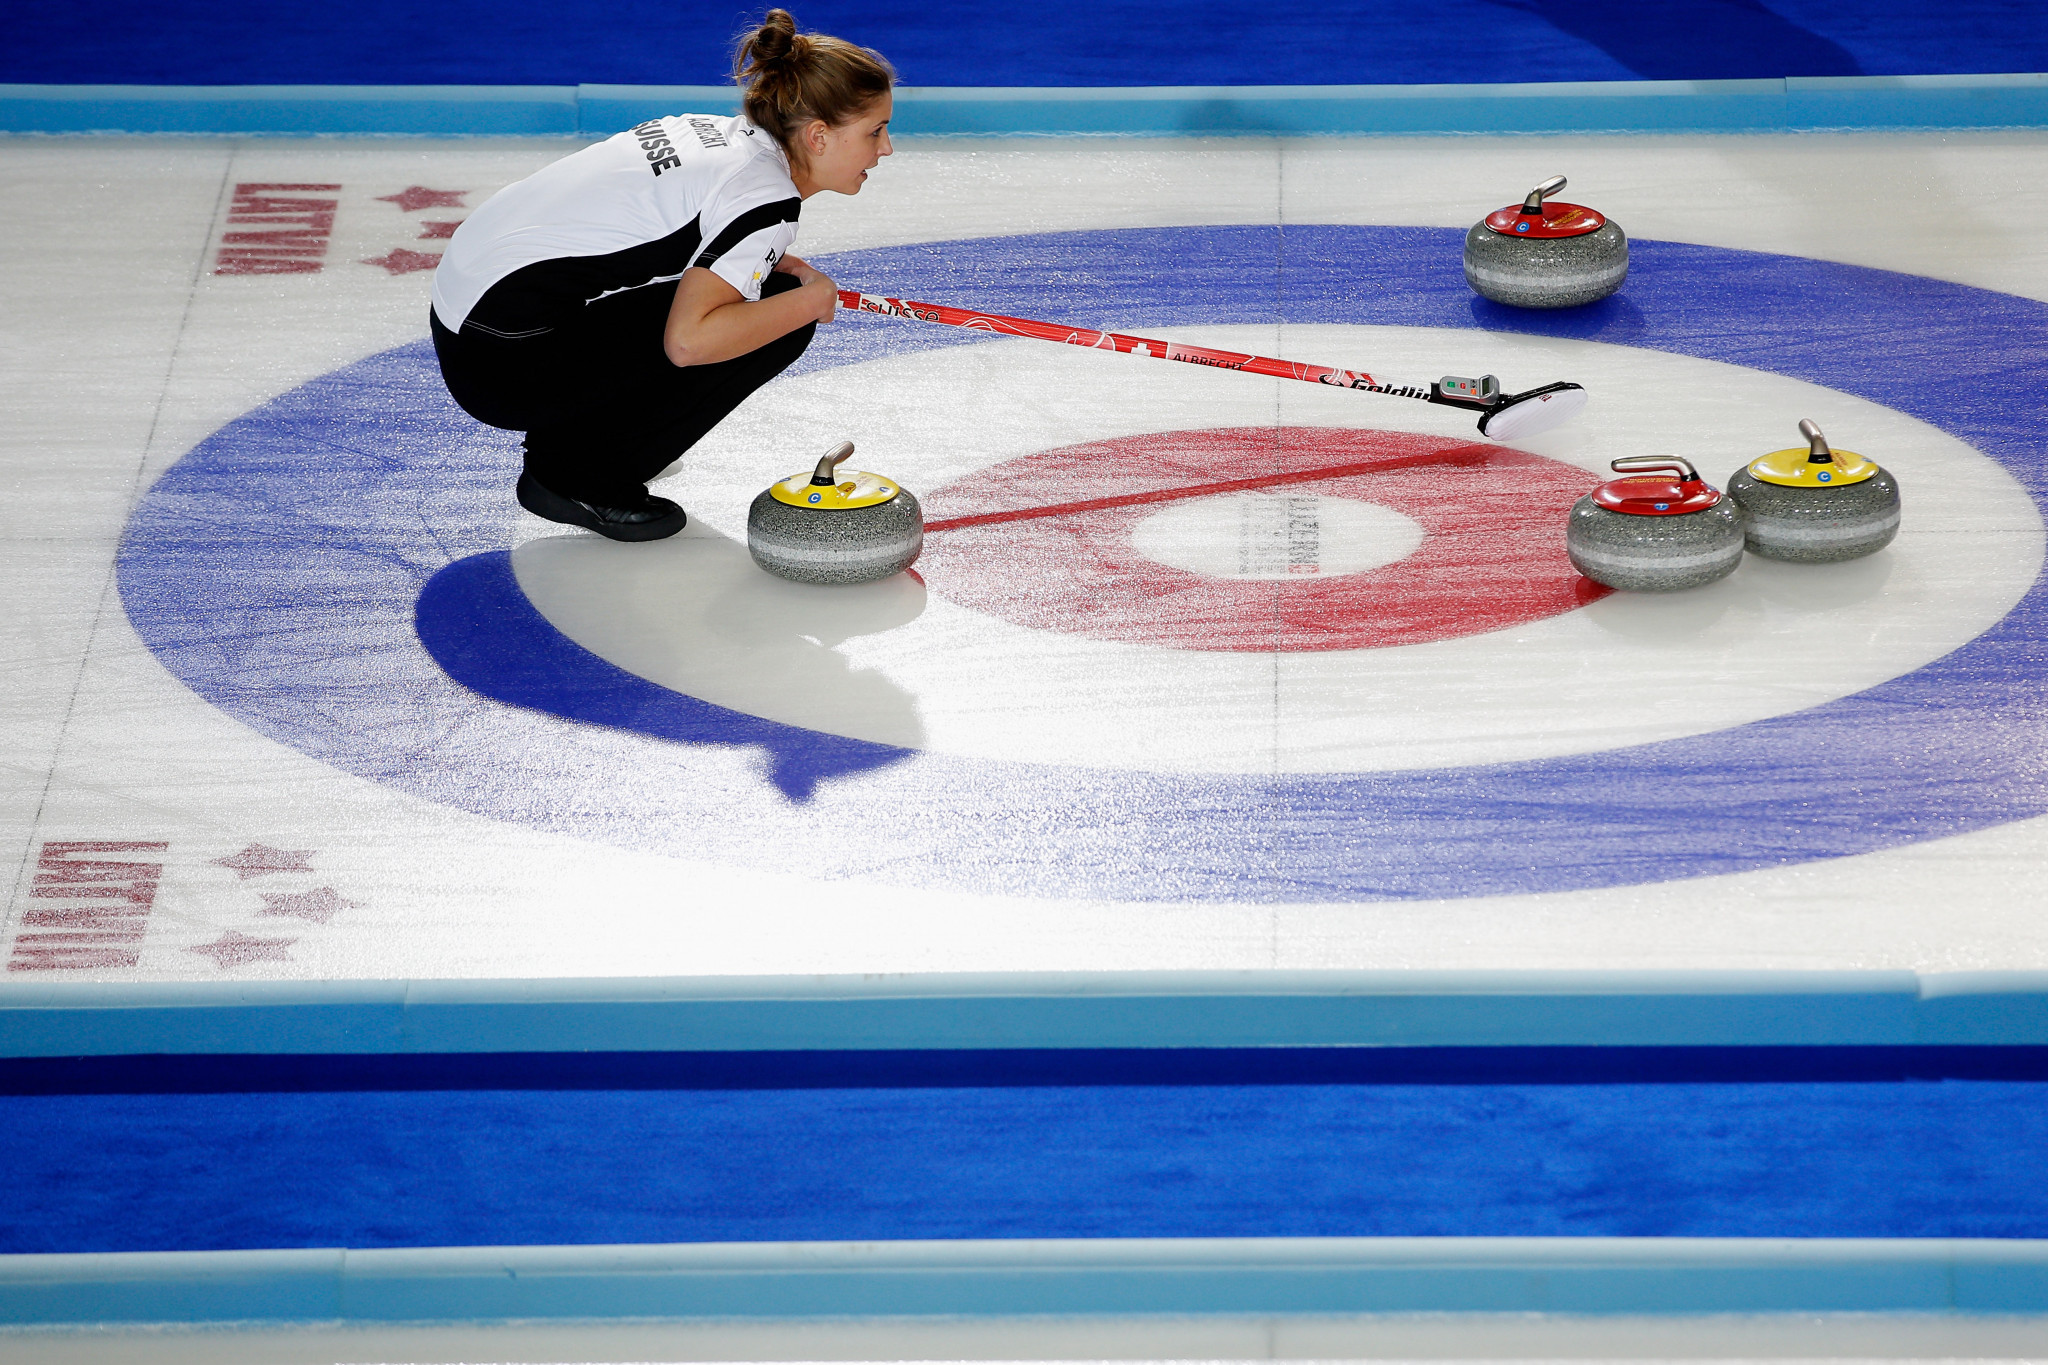 Swiss curler Albrecht named as athlete role model for Lausanne 2020 